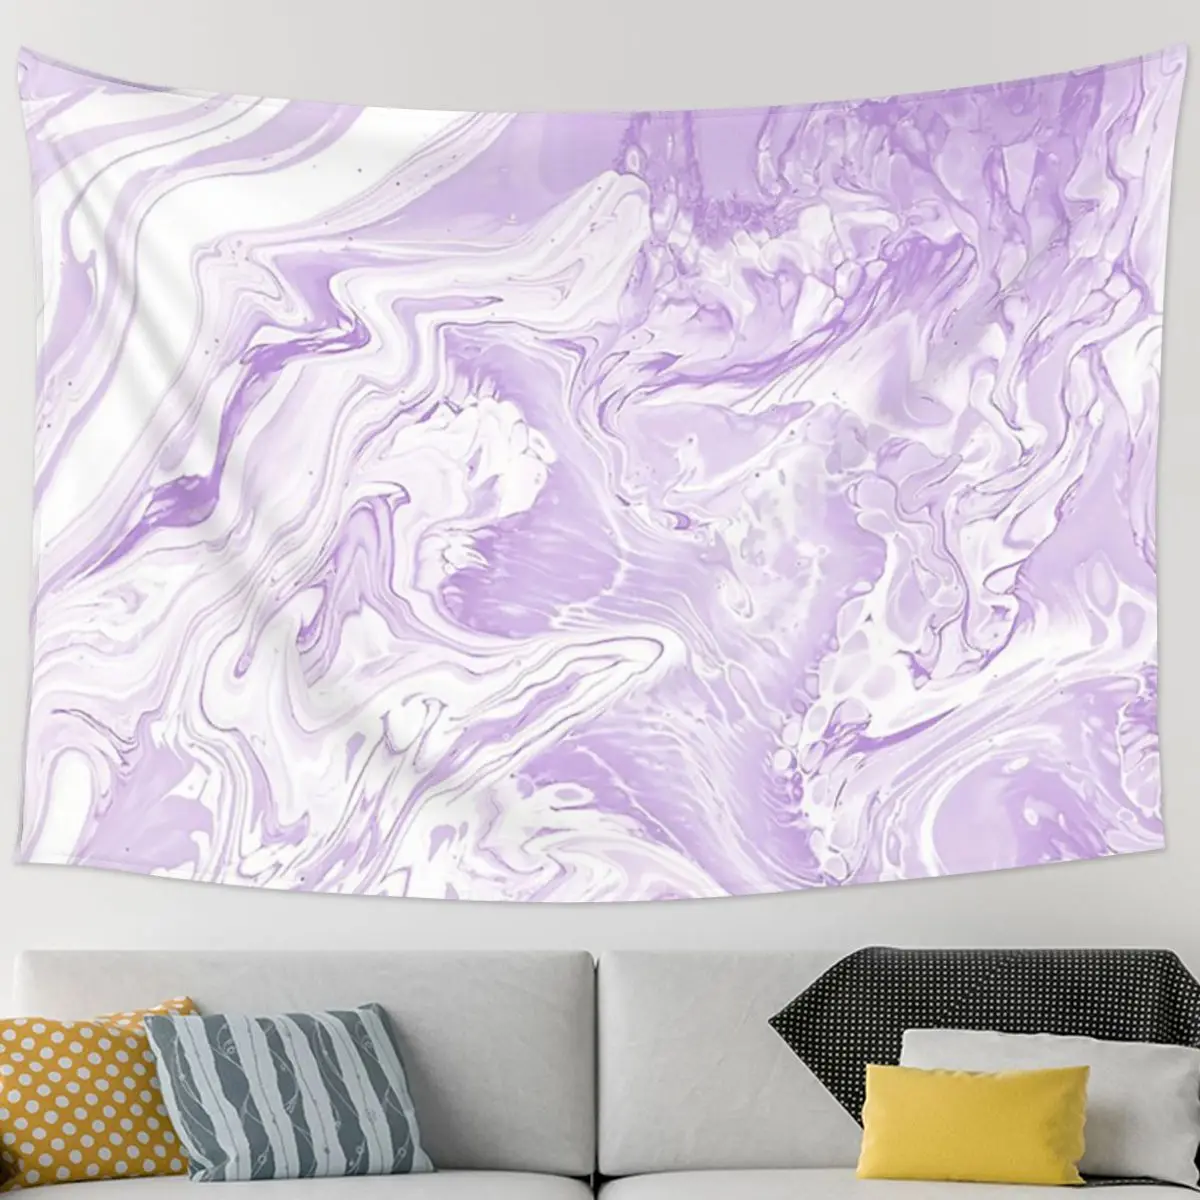 

LAVENDER MARBLE Tapestry Hippie Wall Hanging Aesthetic Home Decoration Tapestries for Living Room Bedroom Dorm Room